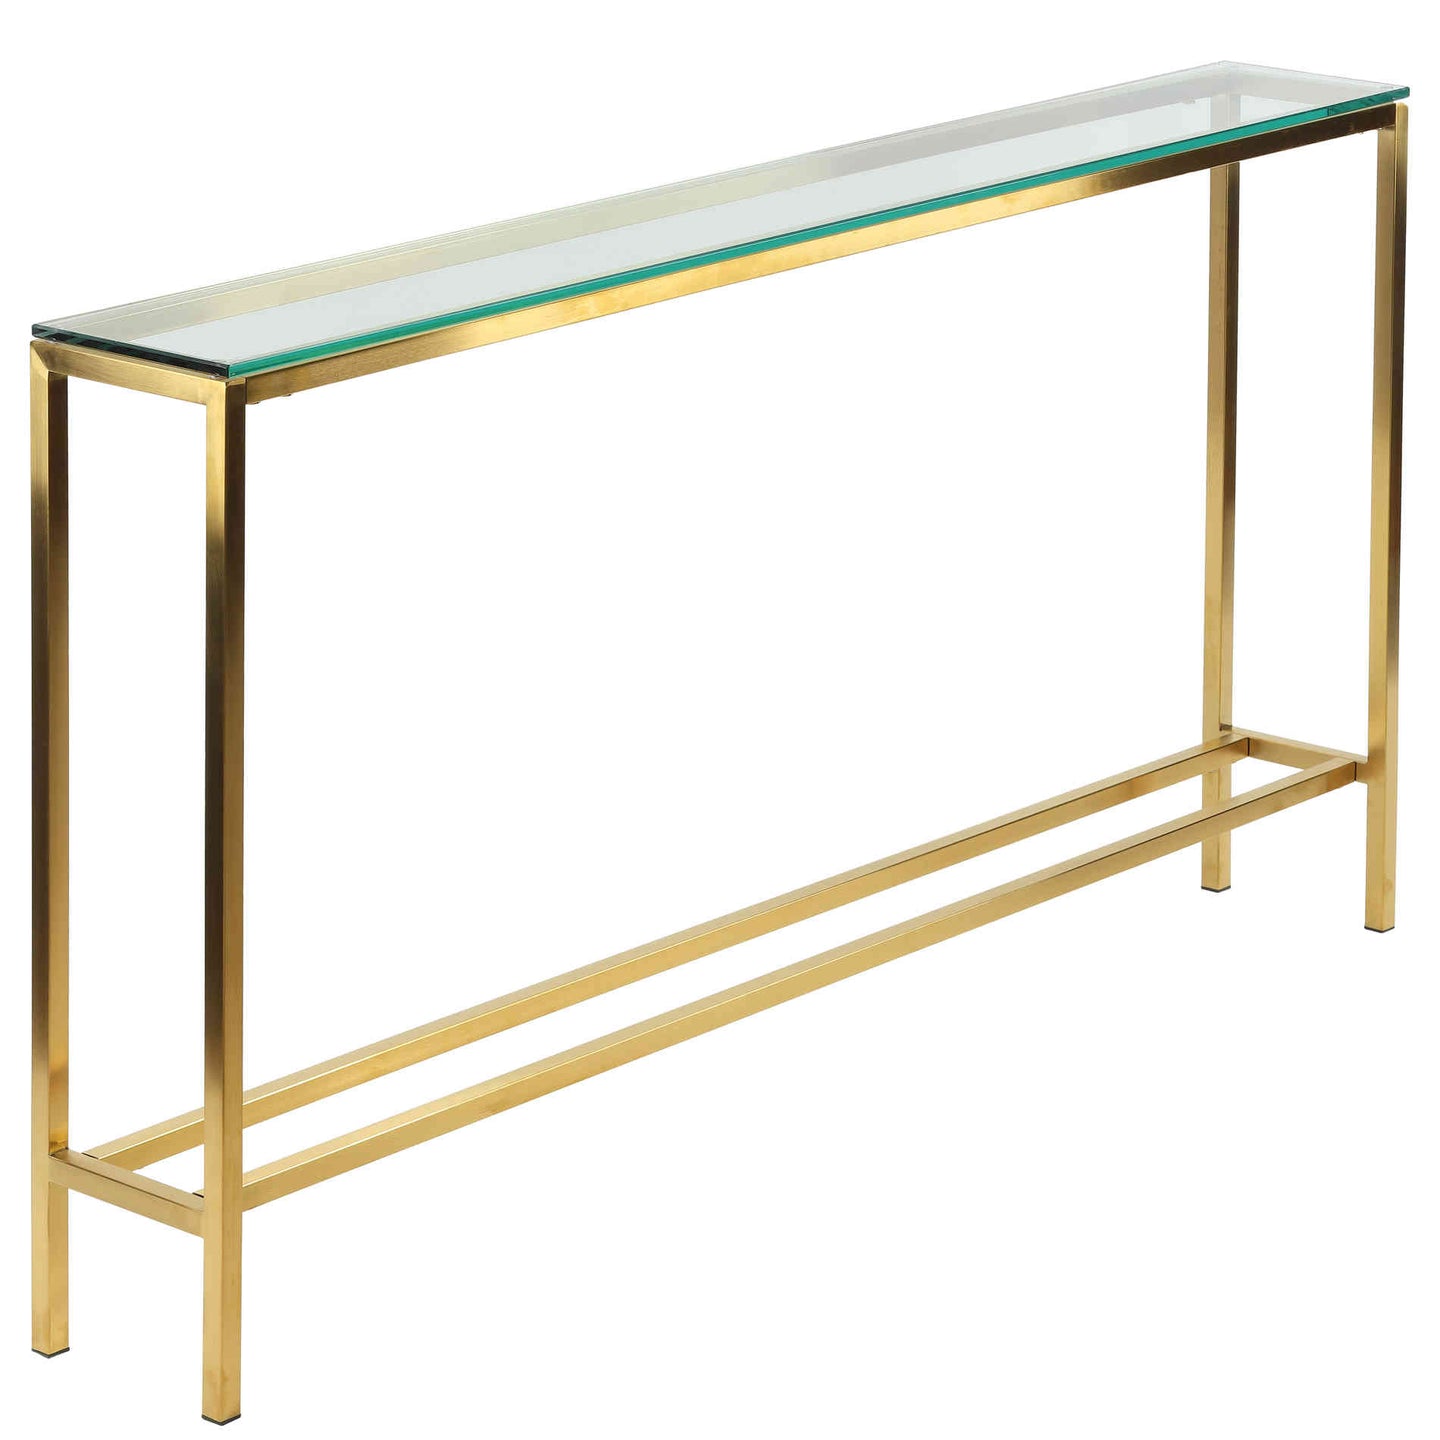 Cortesi Home Juan Console Table, Brushed Gold Color with Clear 10mm Glass, Skinny 56